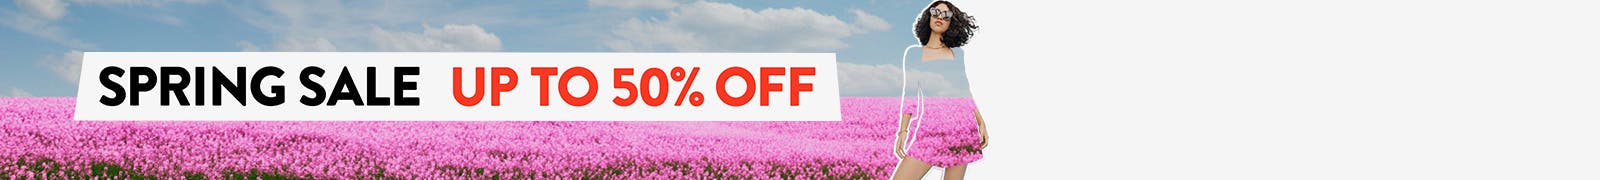 Spring Sale: up to 50% off.